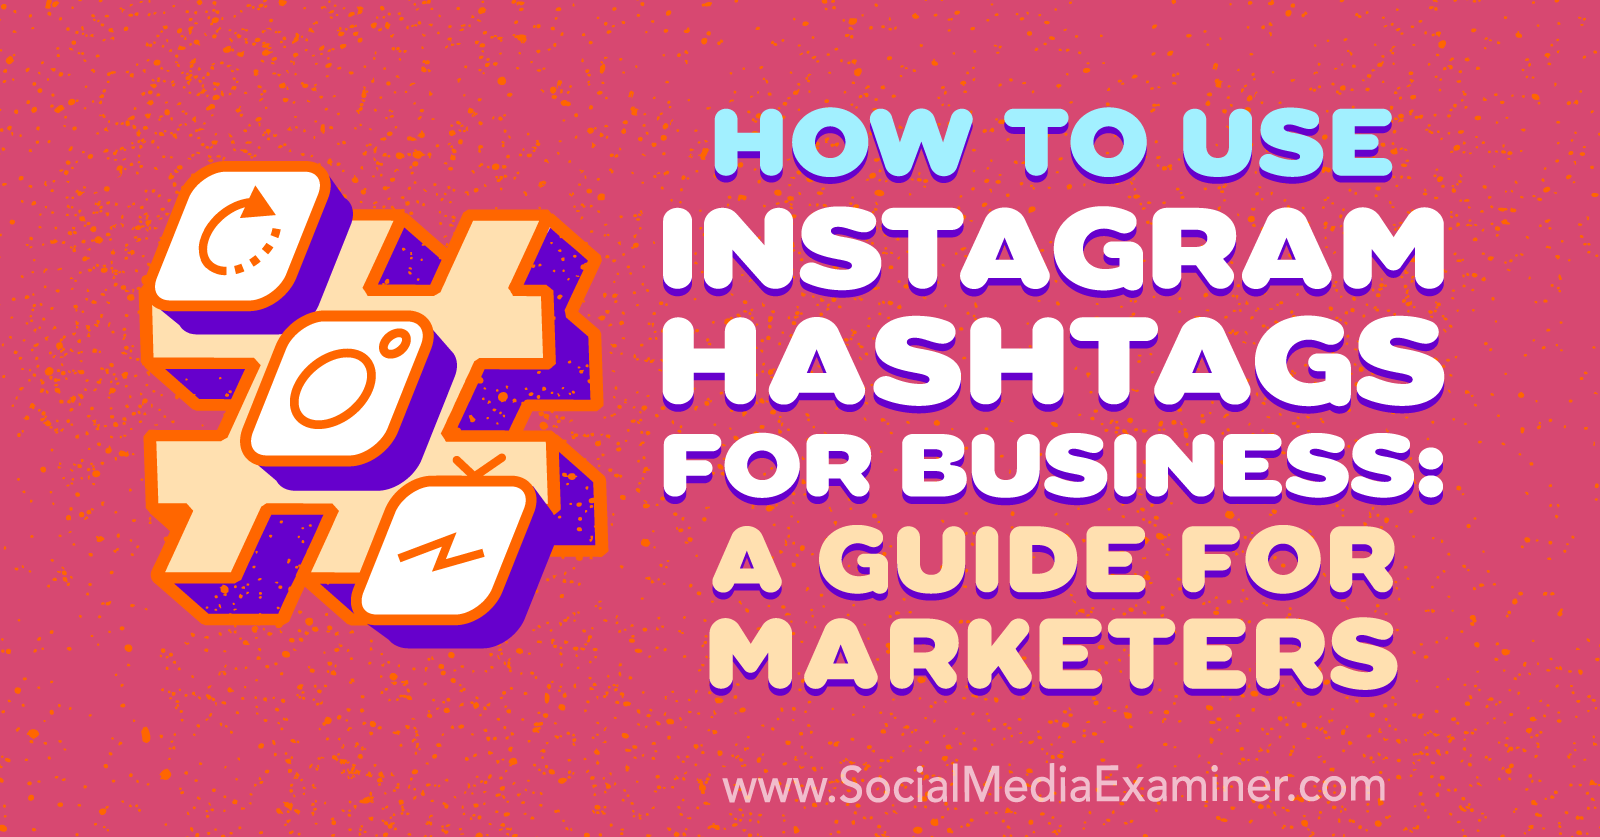 How to Use Instagram Hashtags for Business A Guide for Marketers